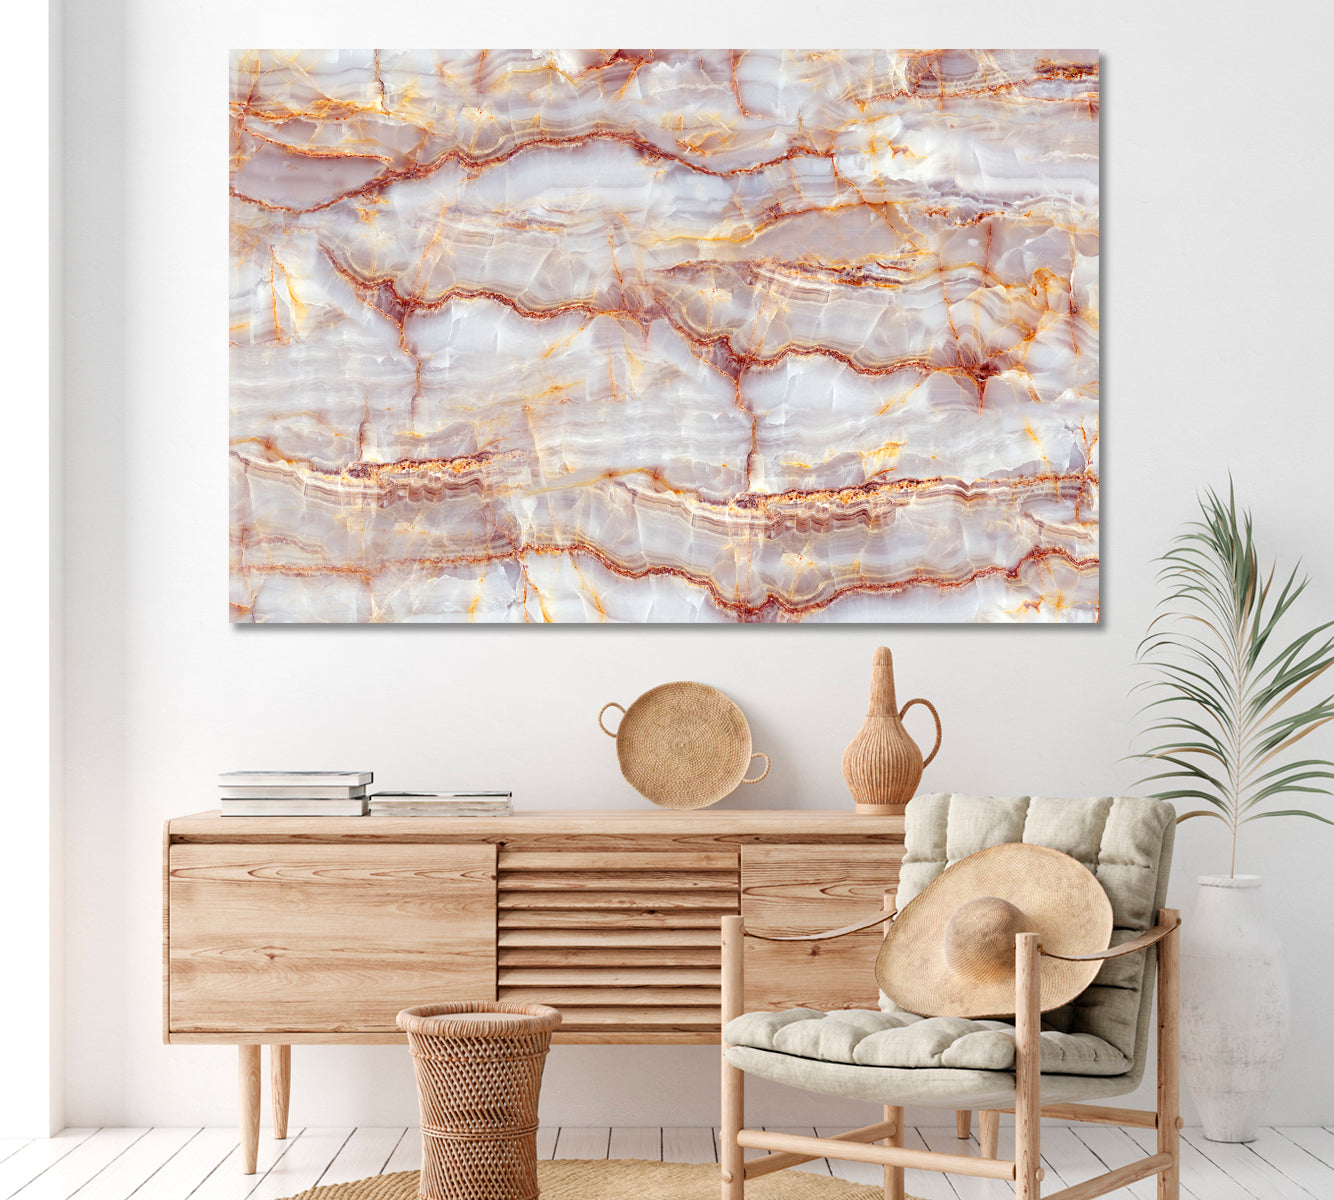 Natural Beige Marble Canvas Print ArtLexy 1 Panel 24"x16" inches 